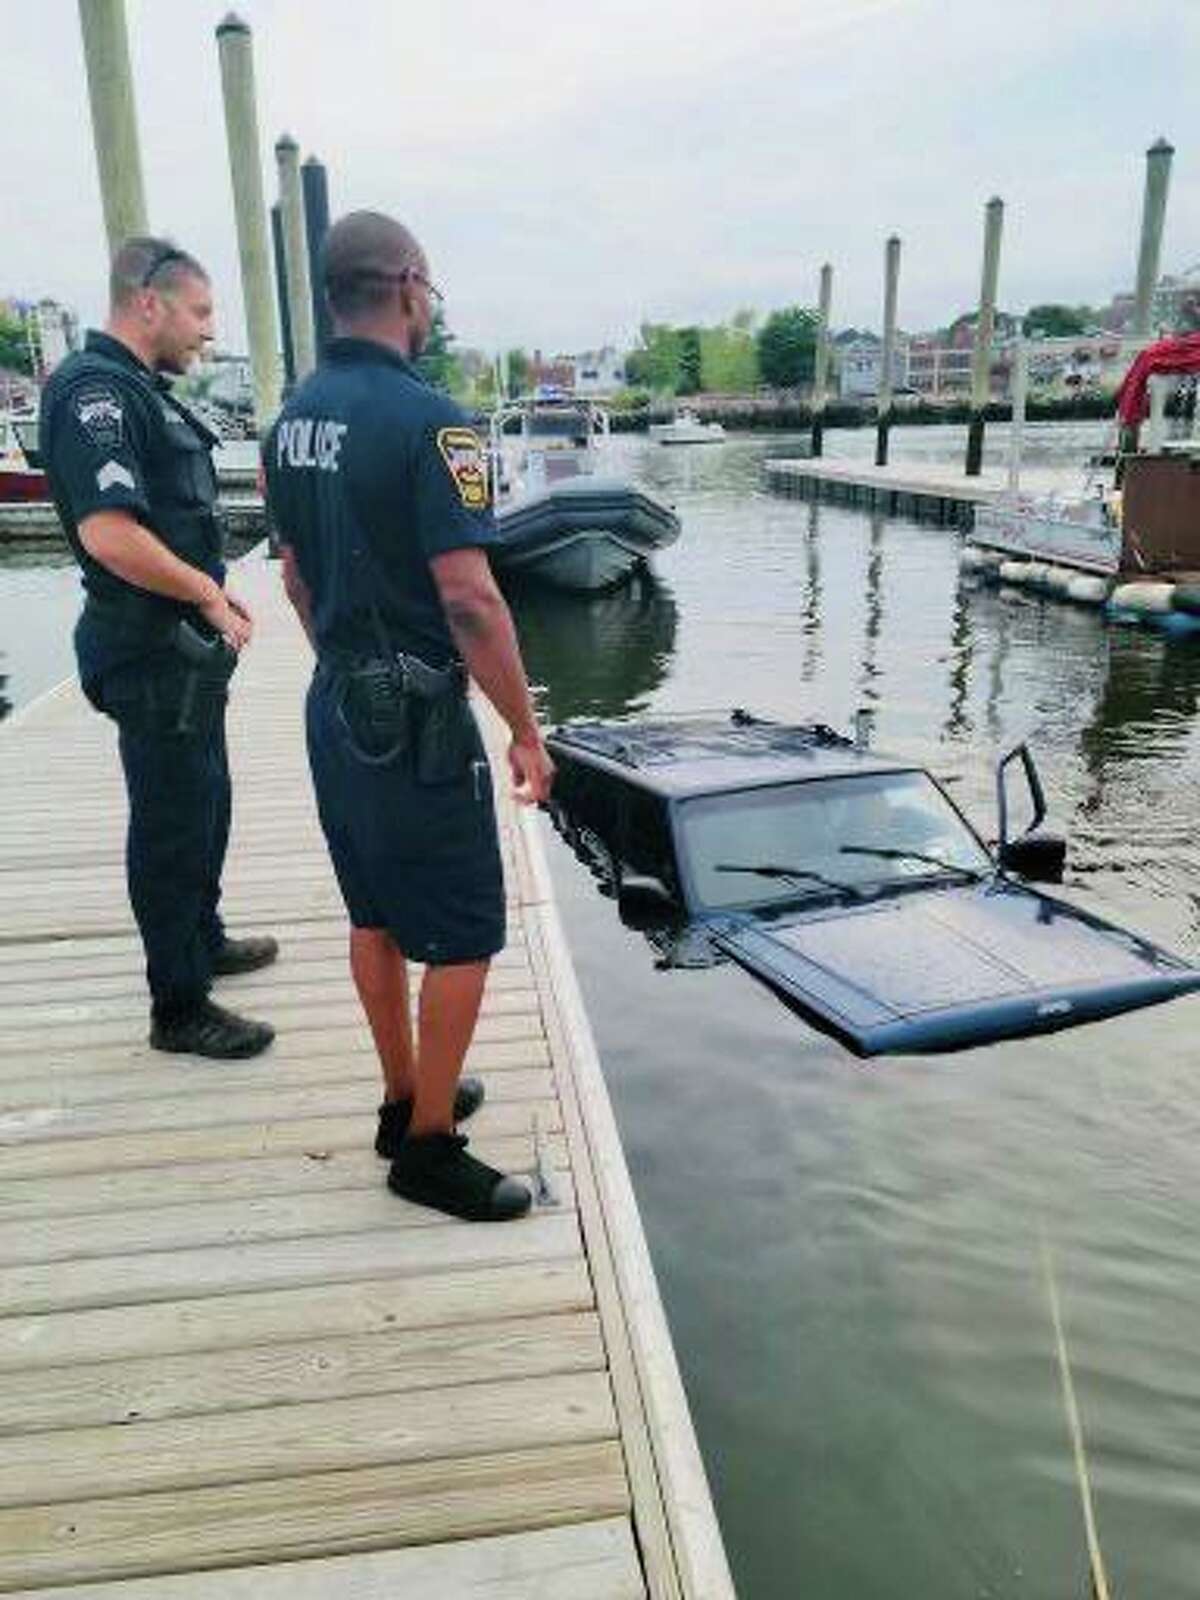 Police said this vehicle and its trailer were both removed from the water near the Veteran’s Park boat launch after both went into the water. No injuries were reported.